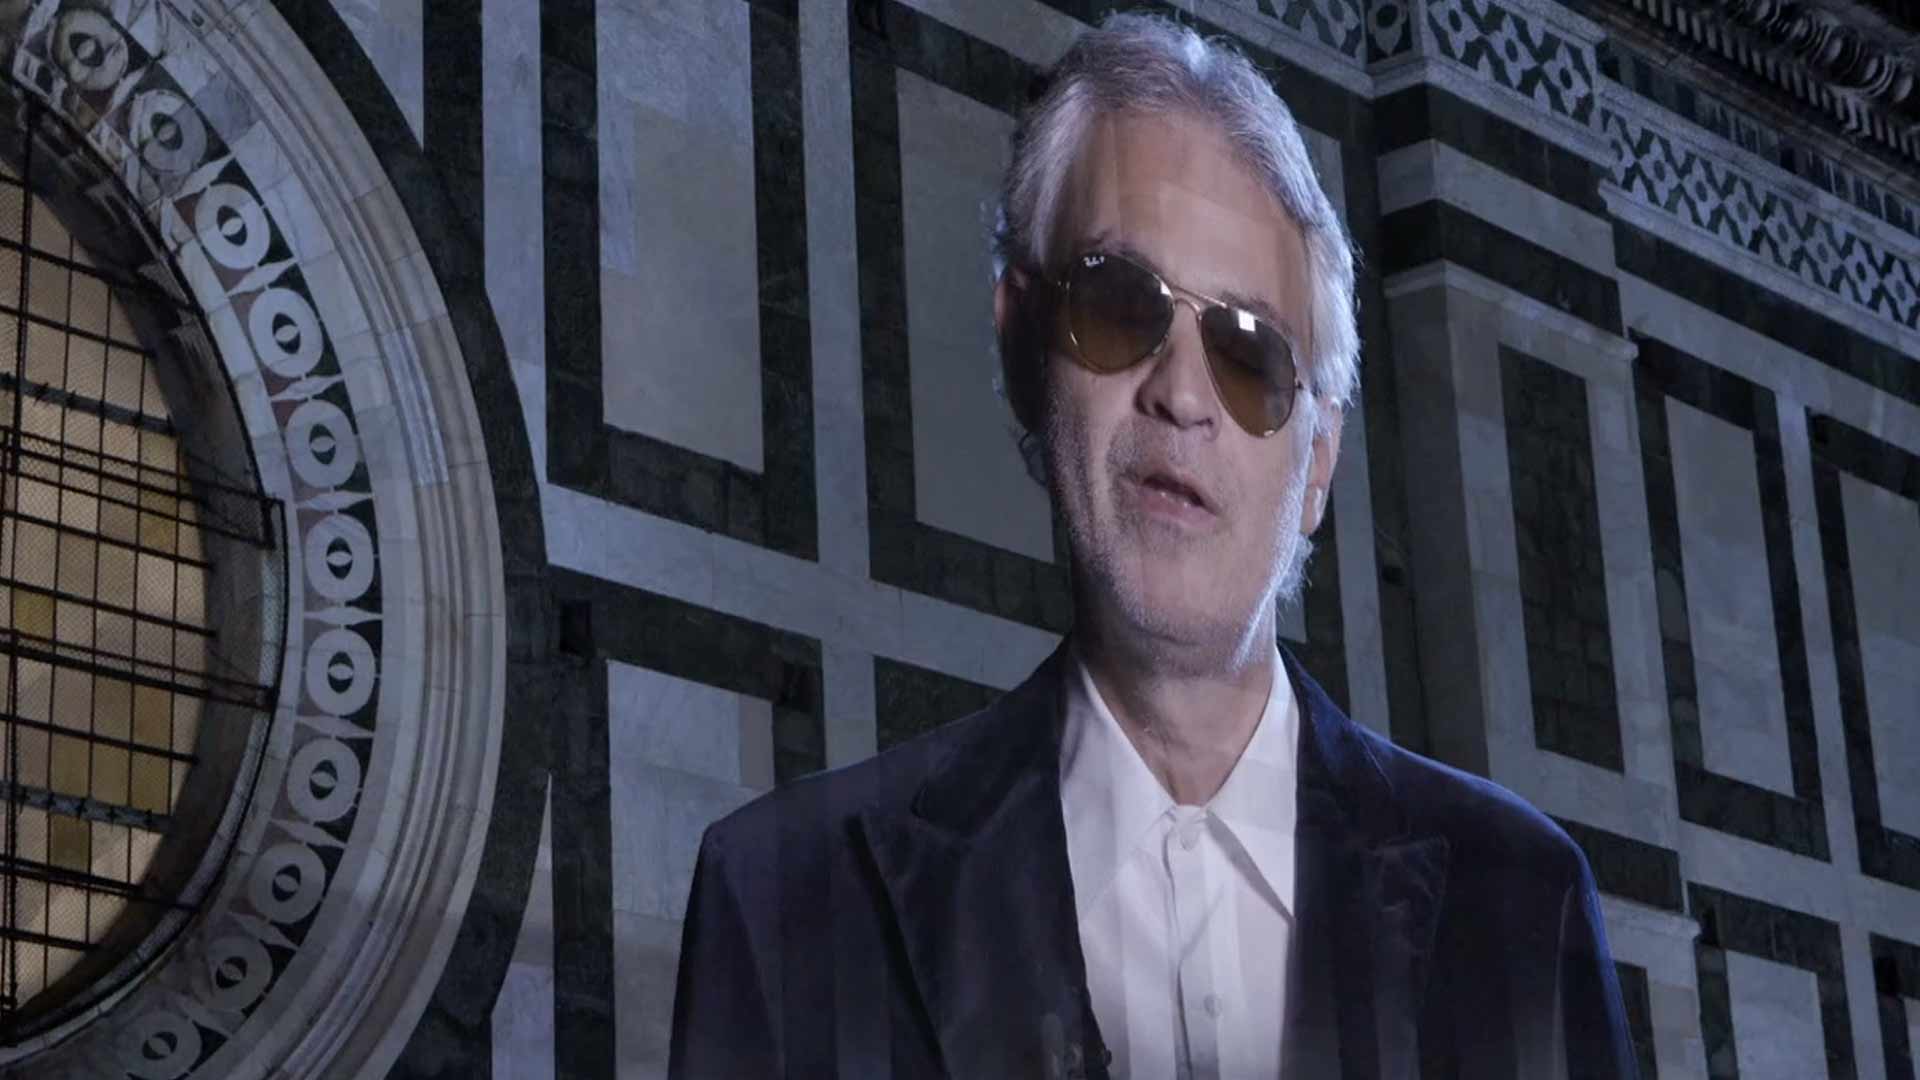 a night in florence bocelli promo 6 1920x1080